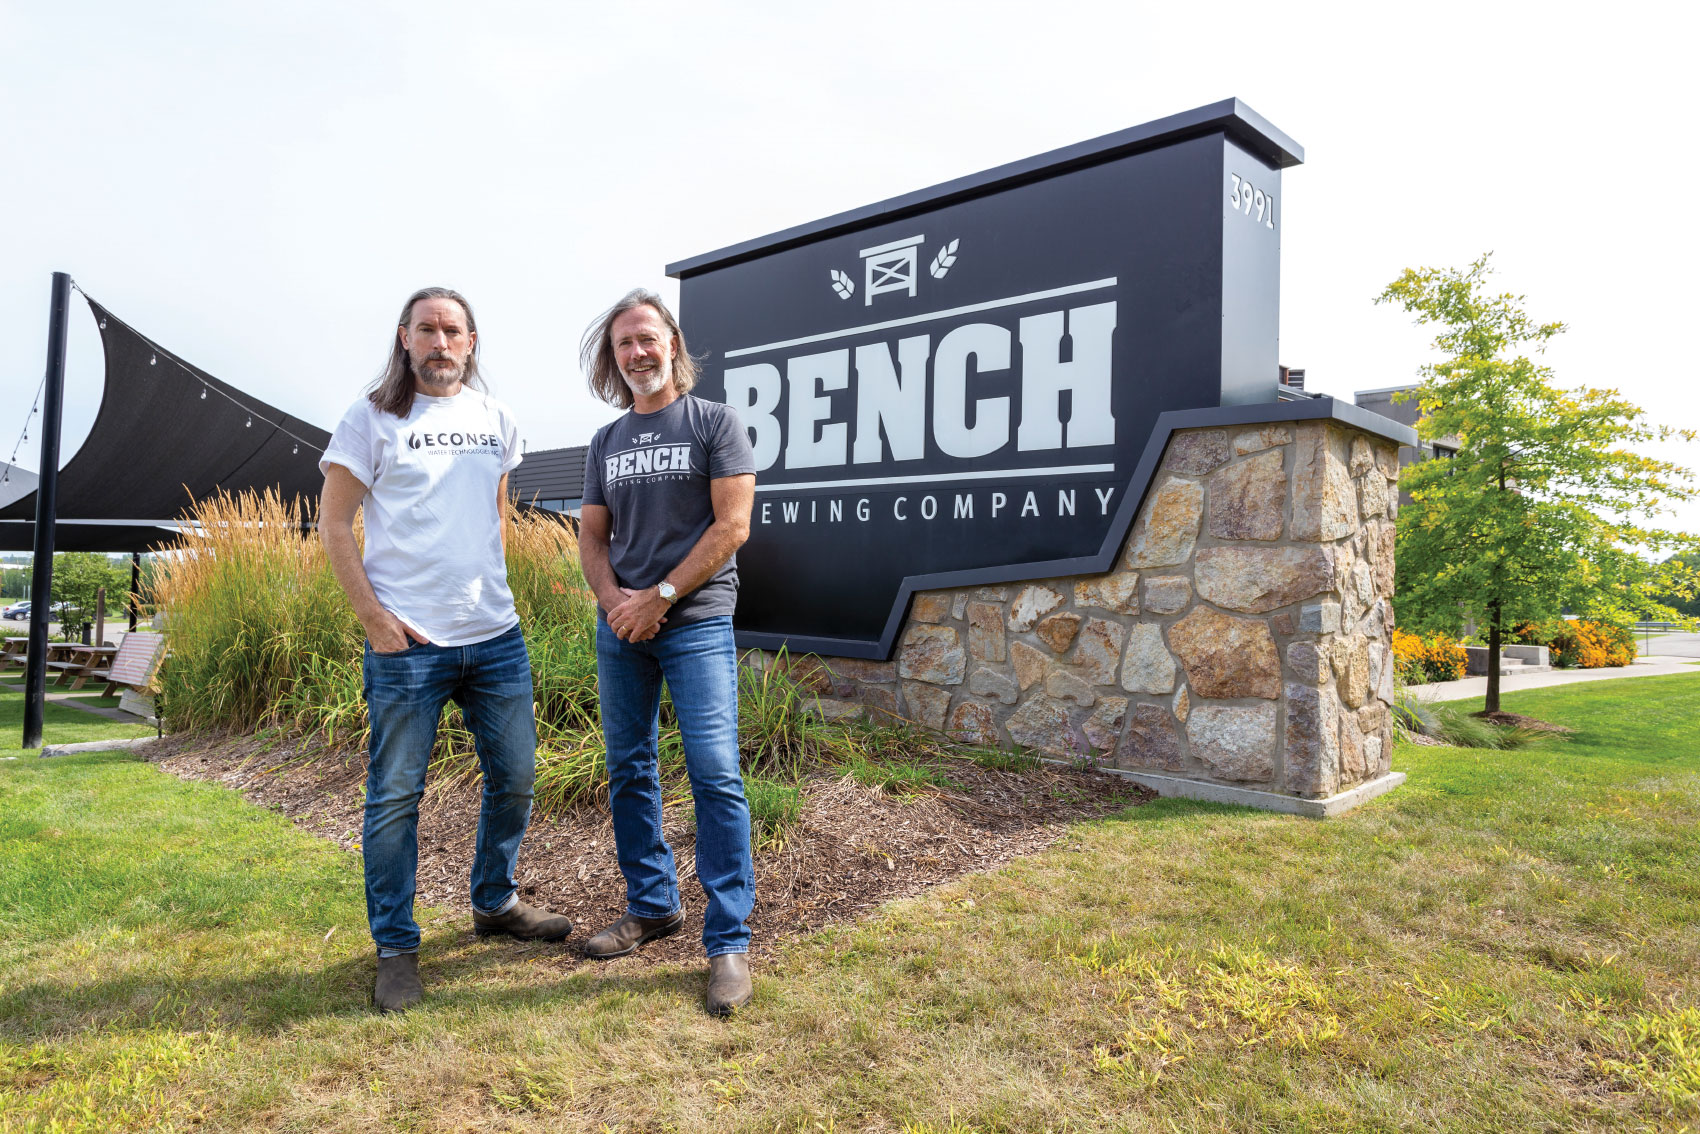 Derek Davy and Matt Griffen posing in front of Bench Brewing Company sign